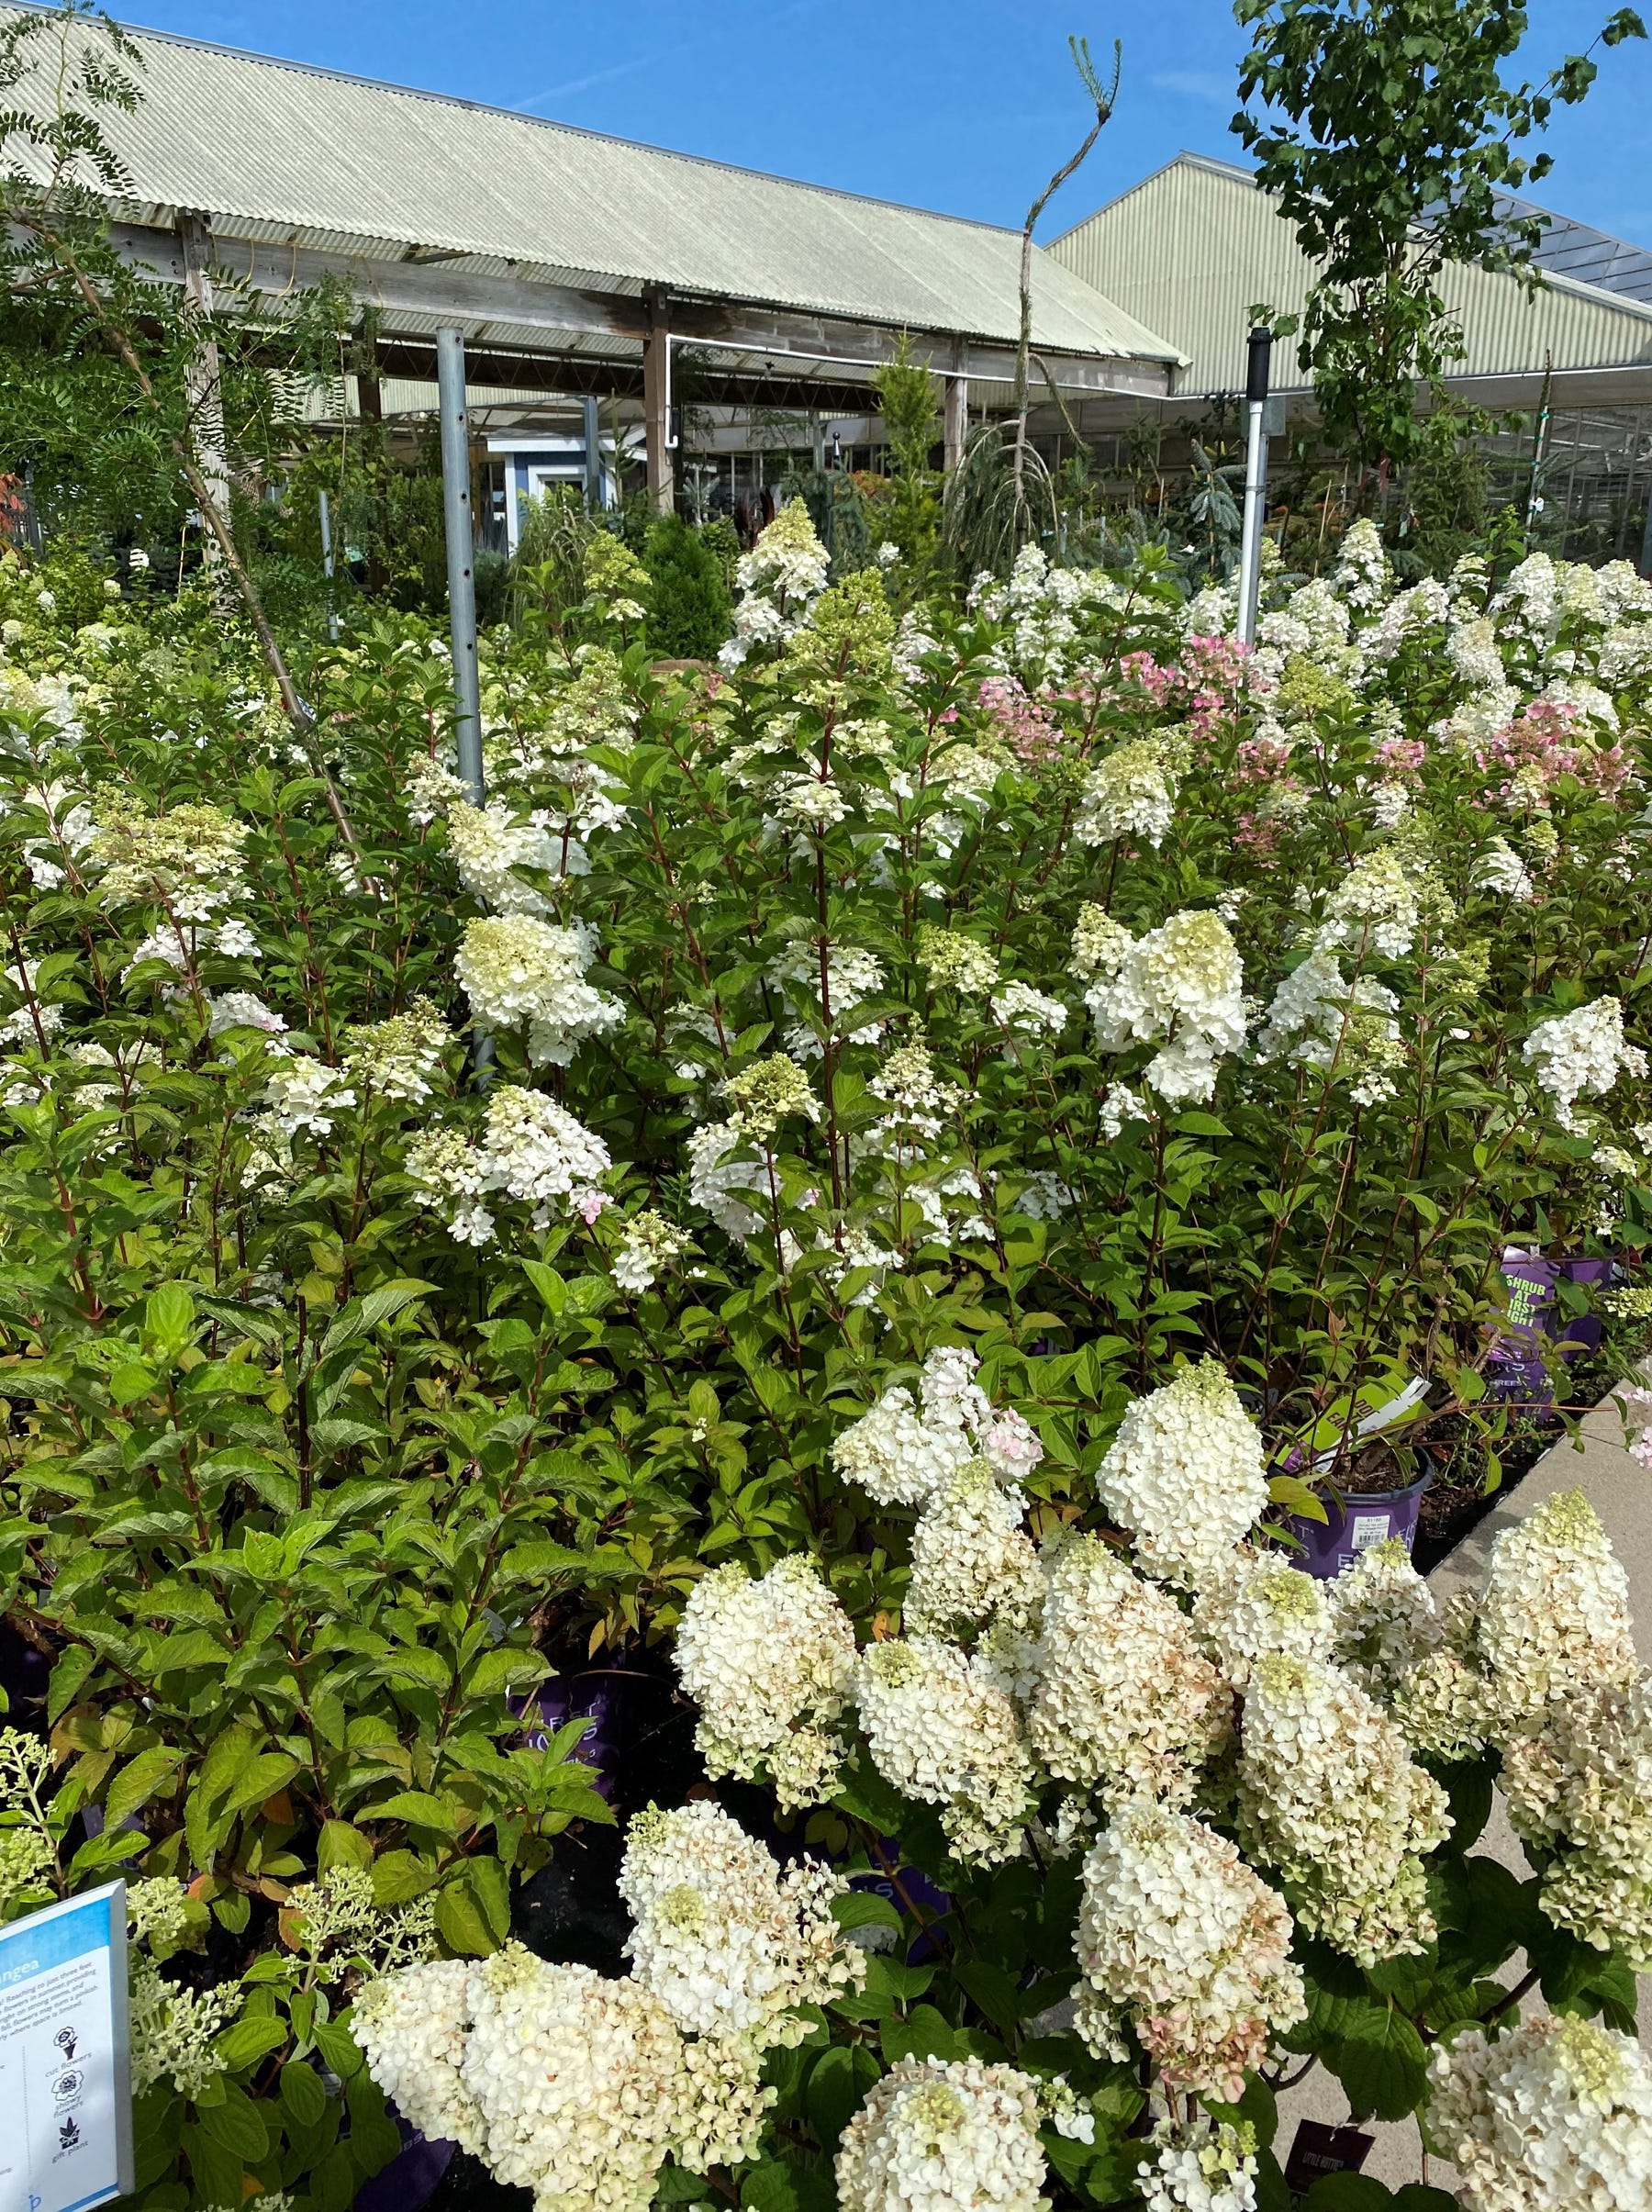 group of hydrangeas for sale at garden center